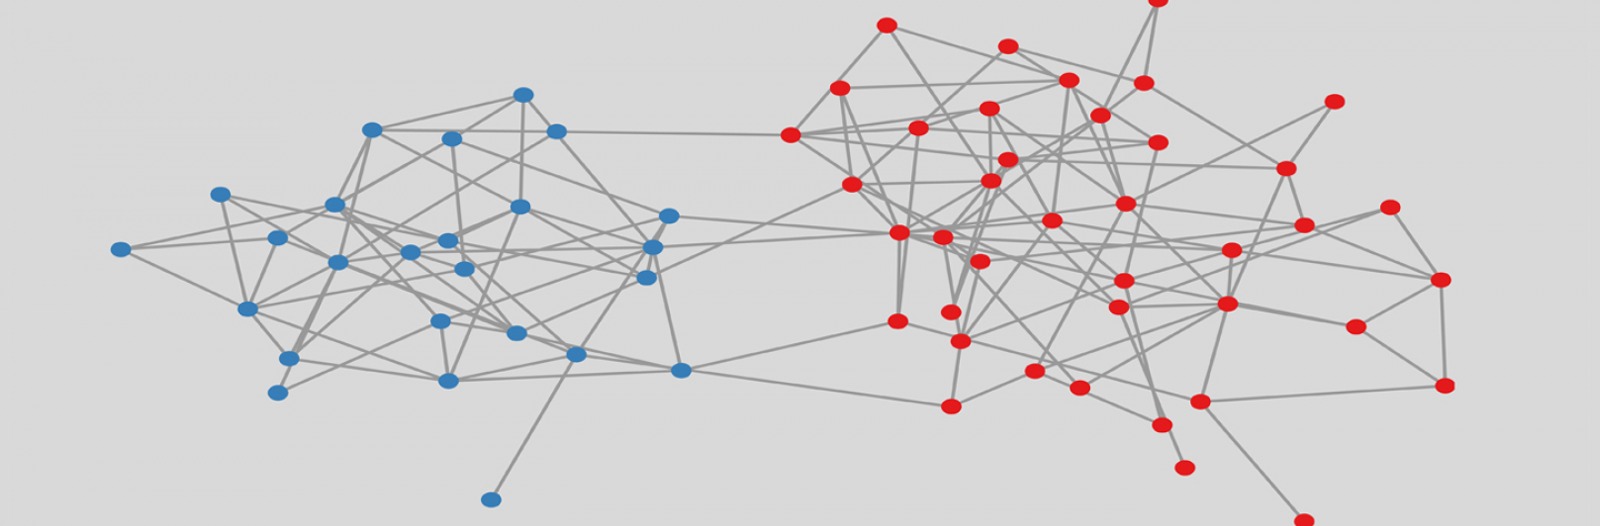 a random graph showing points scattered around and connected by red lines and blue lines